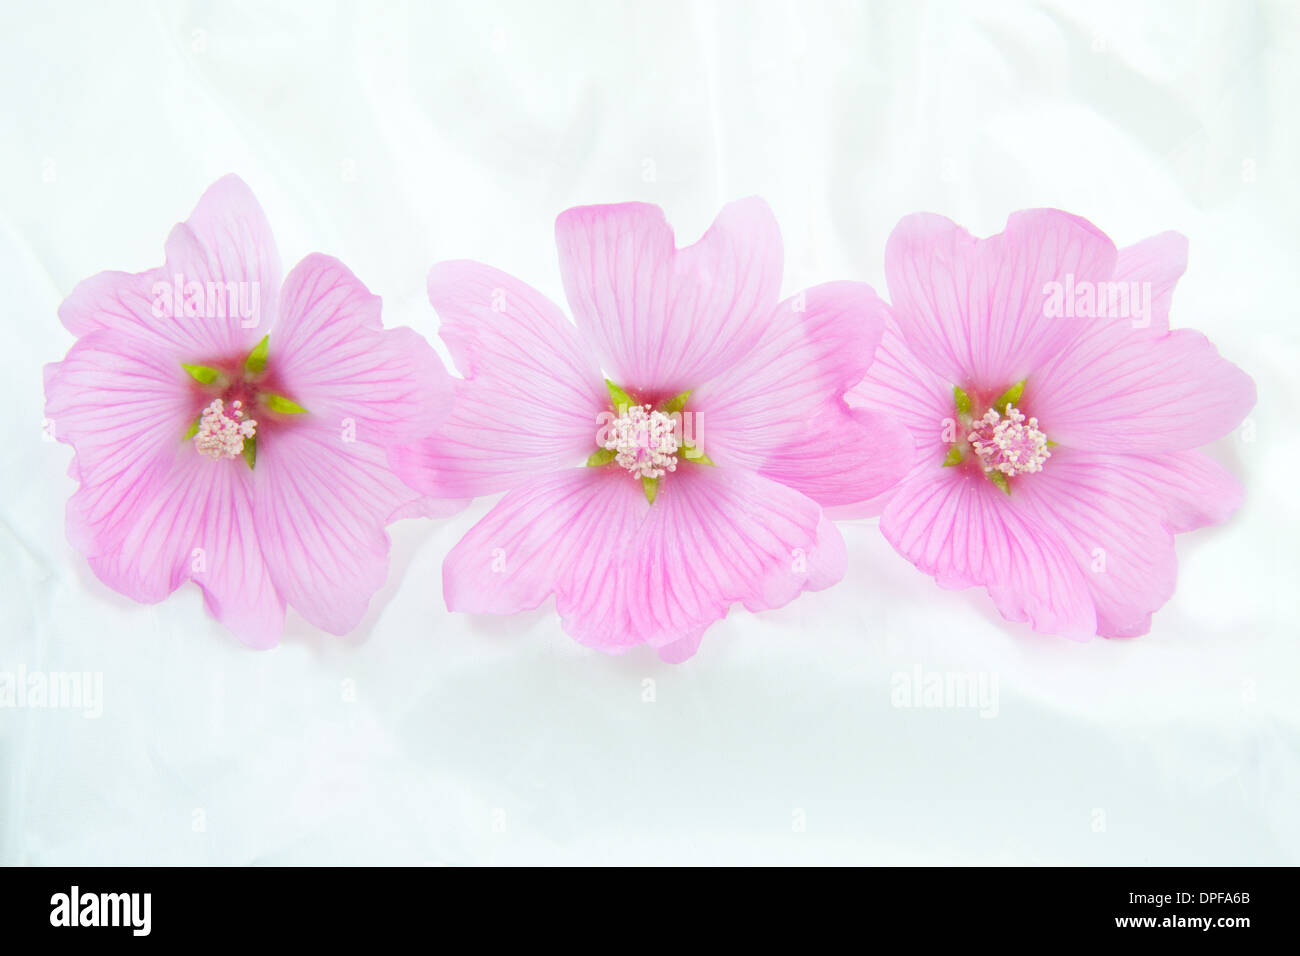 Three pink lavatera's in a row on satin Stock Photo